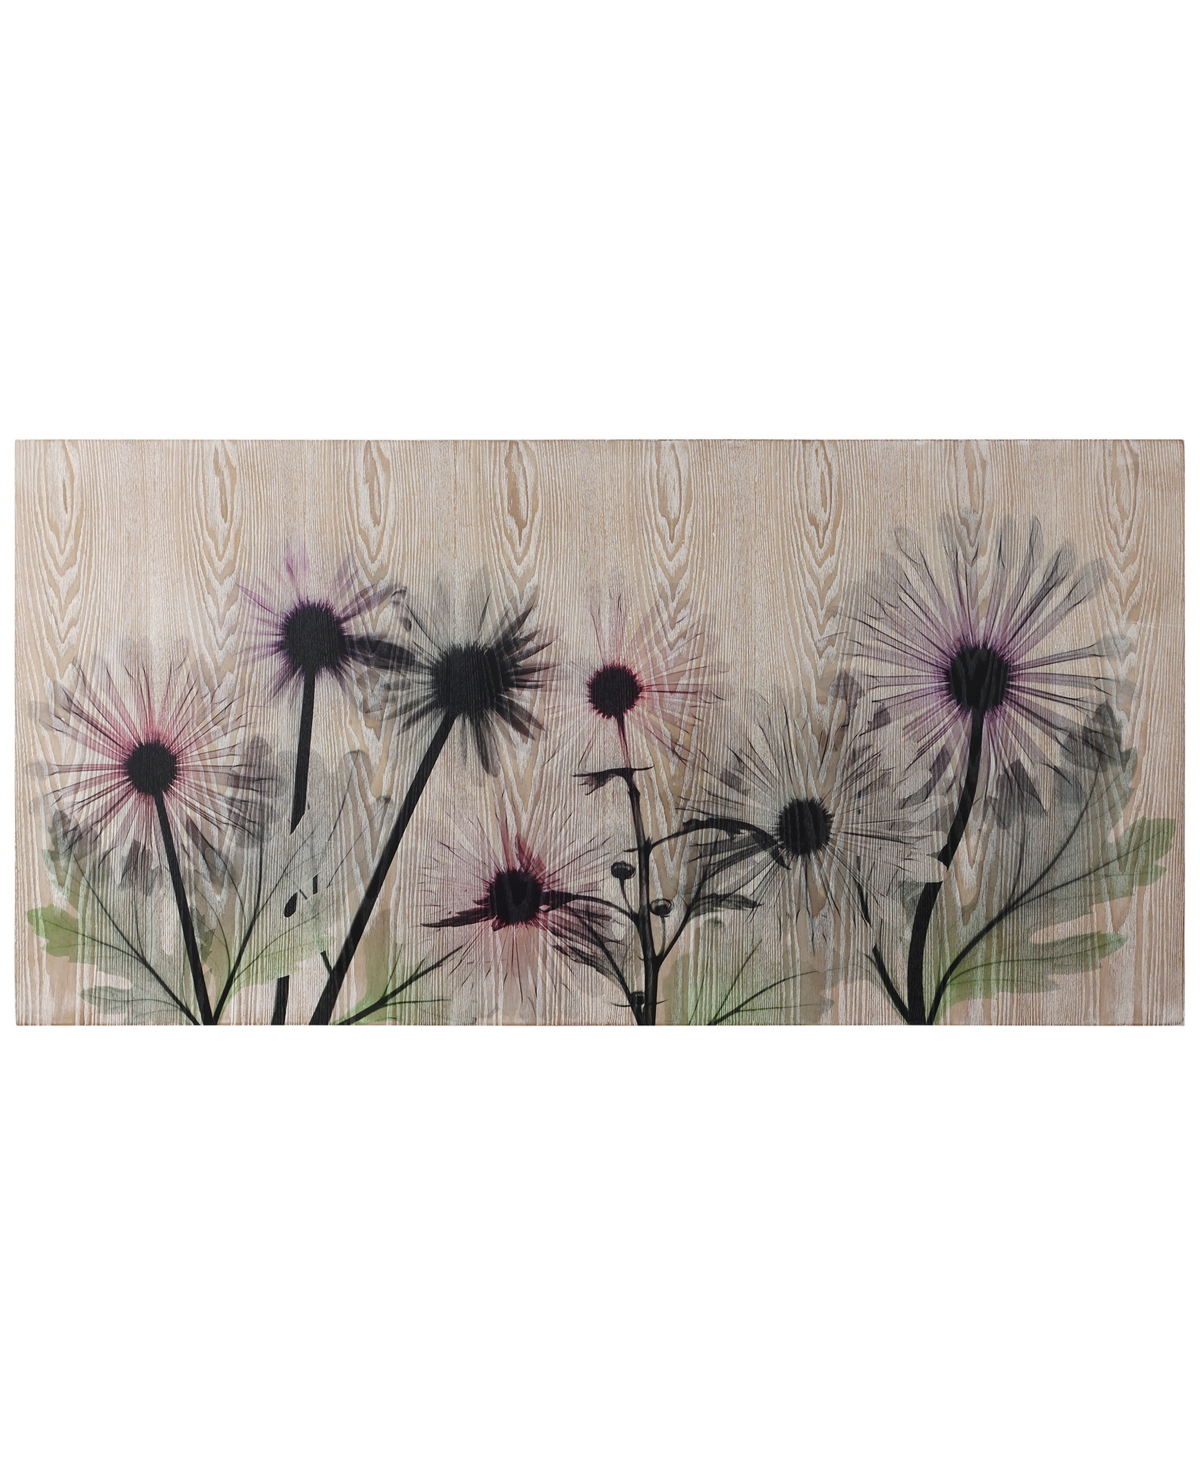 Empire Art Direct "wild Flowers" Fine Radiographic Photography Hi Definition Giclee Printed Directly On Hand Finished In Pink,green